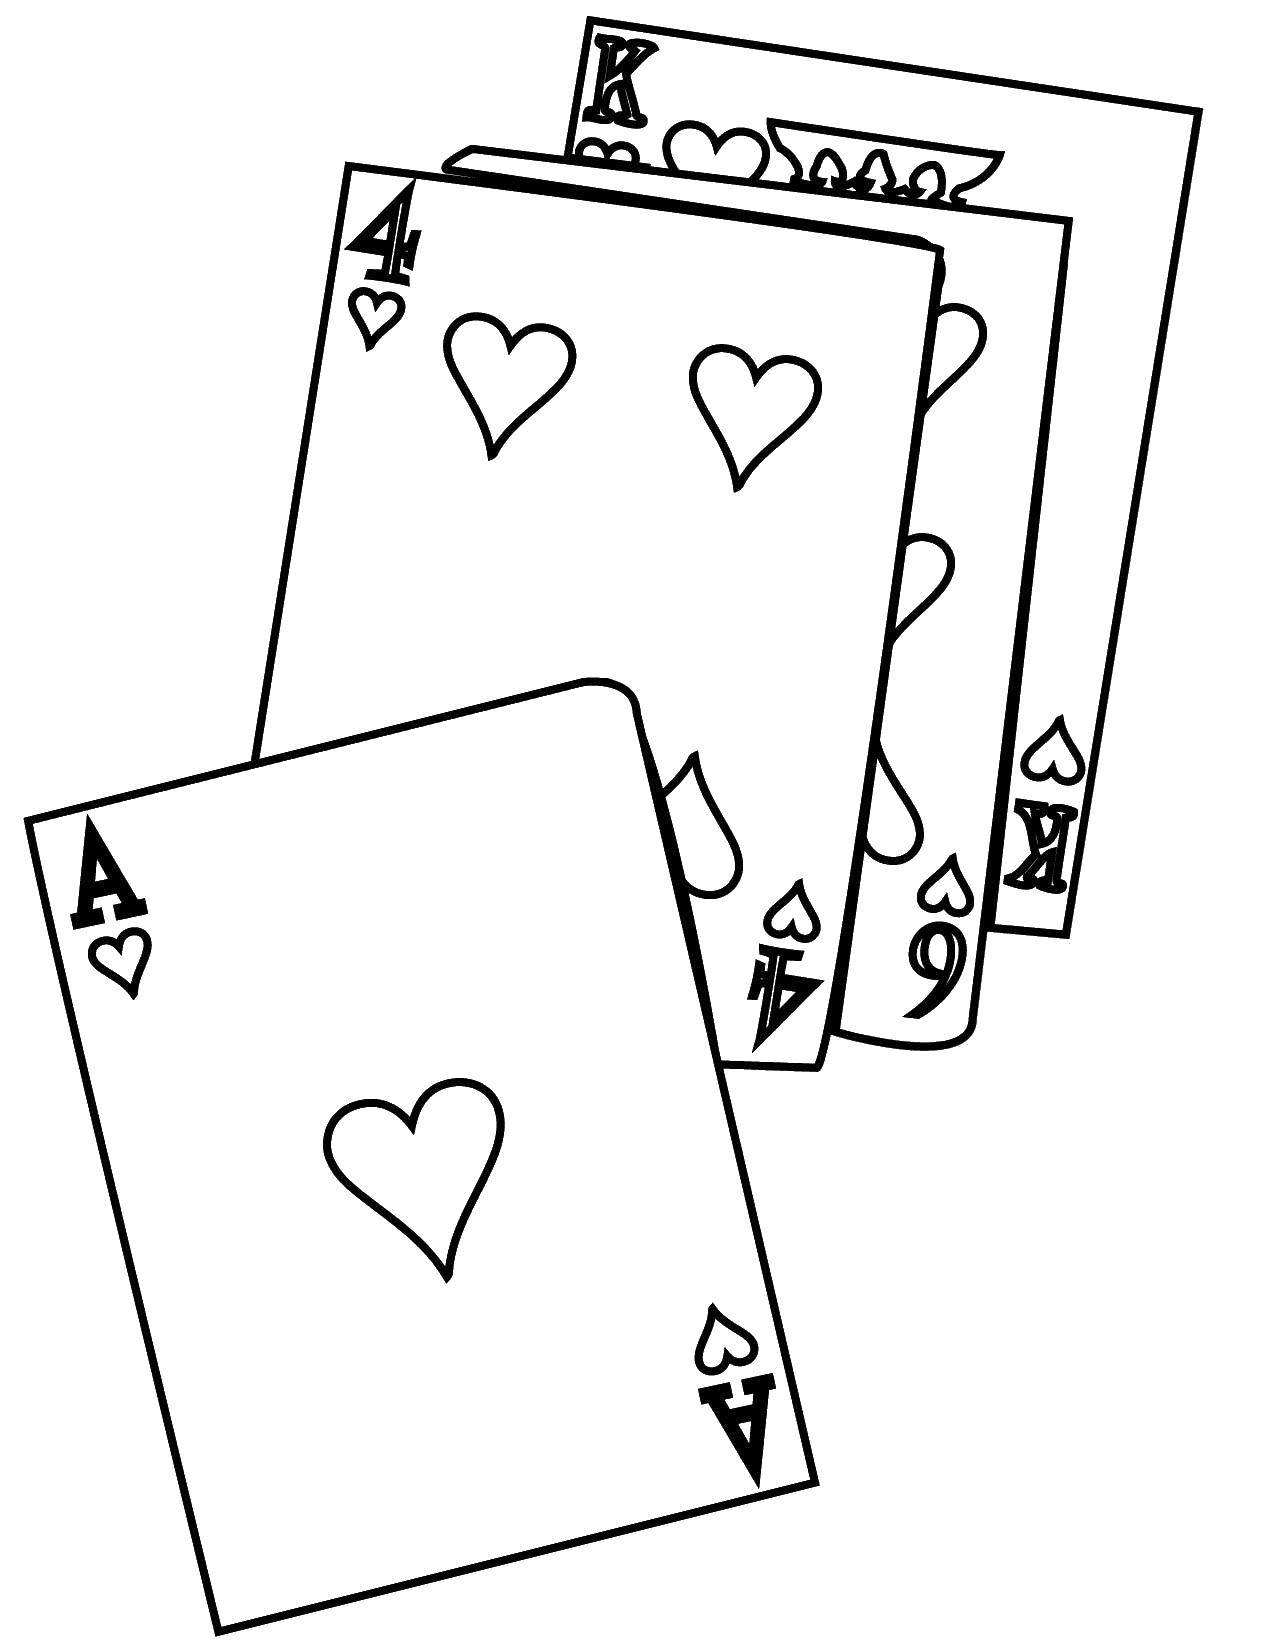 Online coloring pages coloring page playing cards game download print coloring page